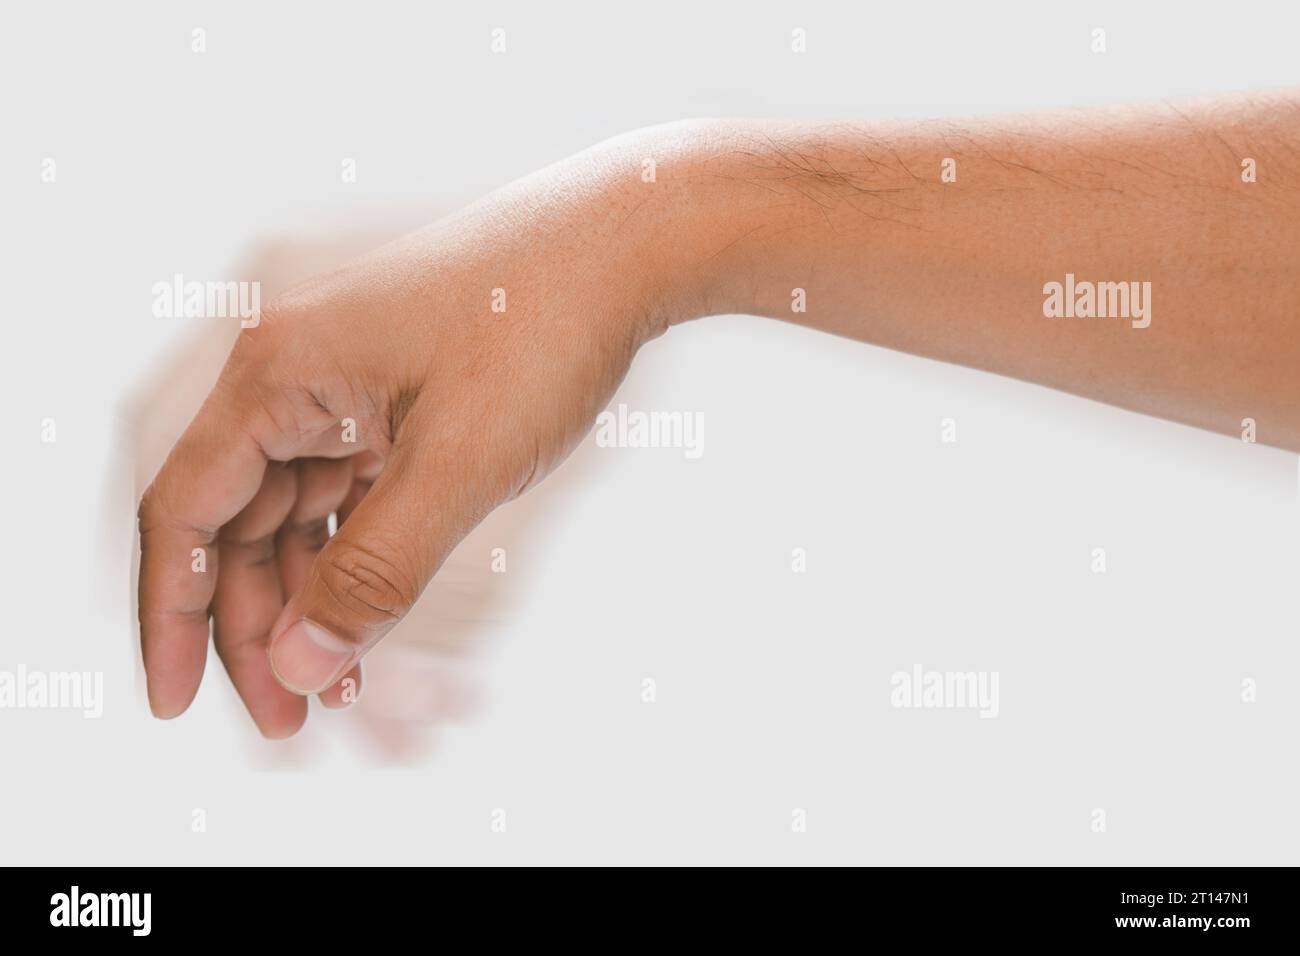 The muscles the man's hand are twitching. Stock Photo